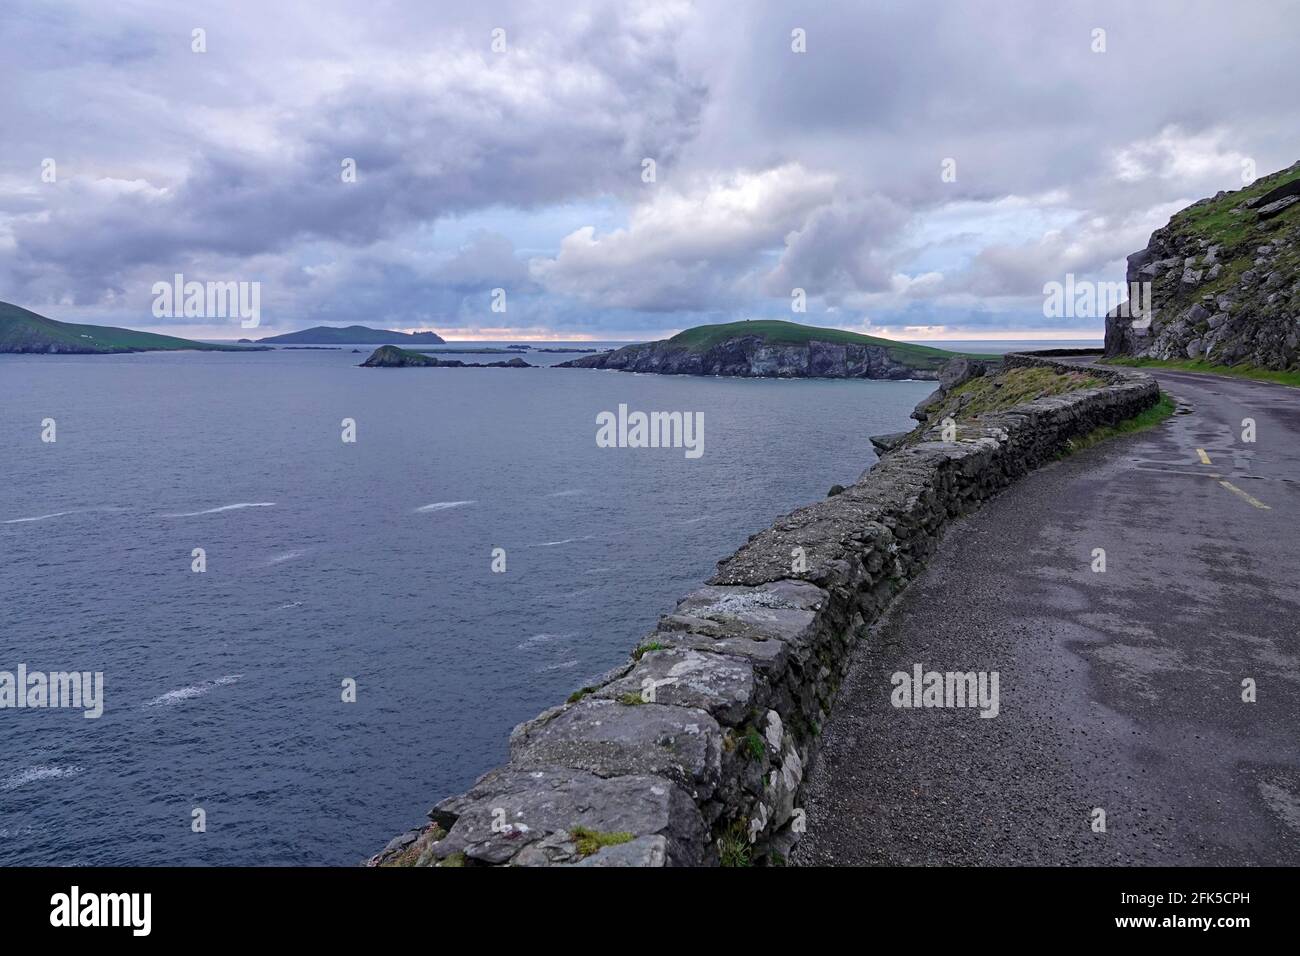 The North Atlantic Ocean is viewed from the rocky coastline of Dingle Peninsula, Ireland during the evening. Stock Photo